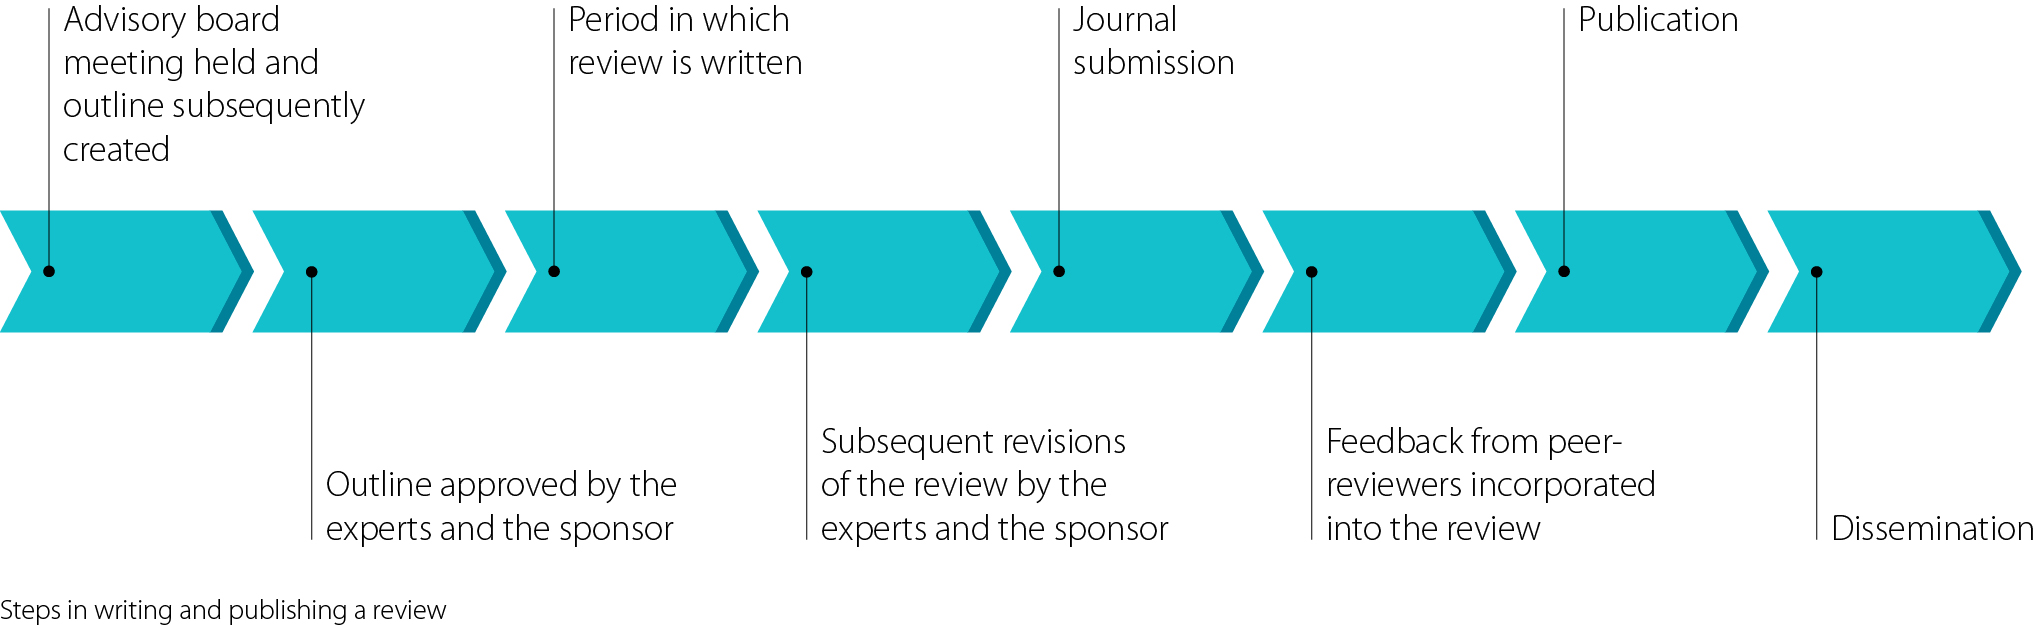 steps in writing and publishing a medical review